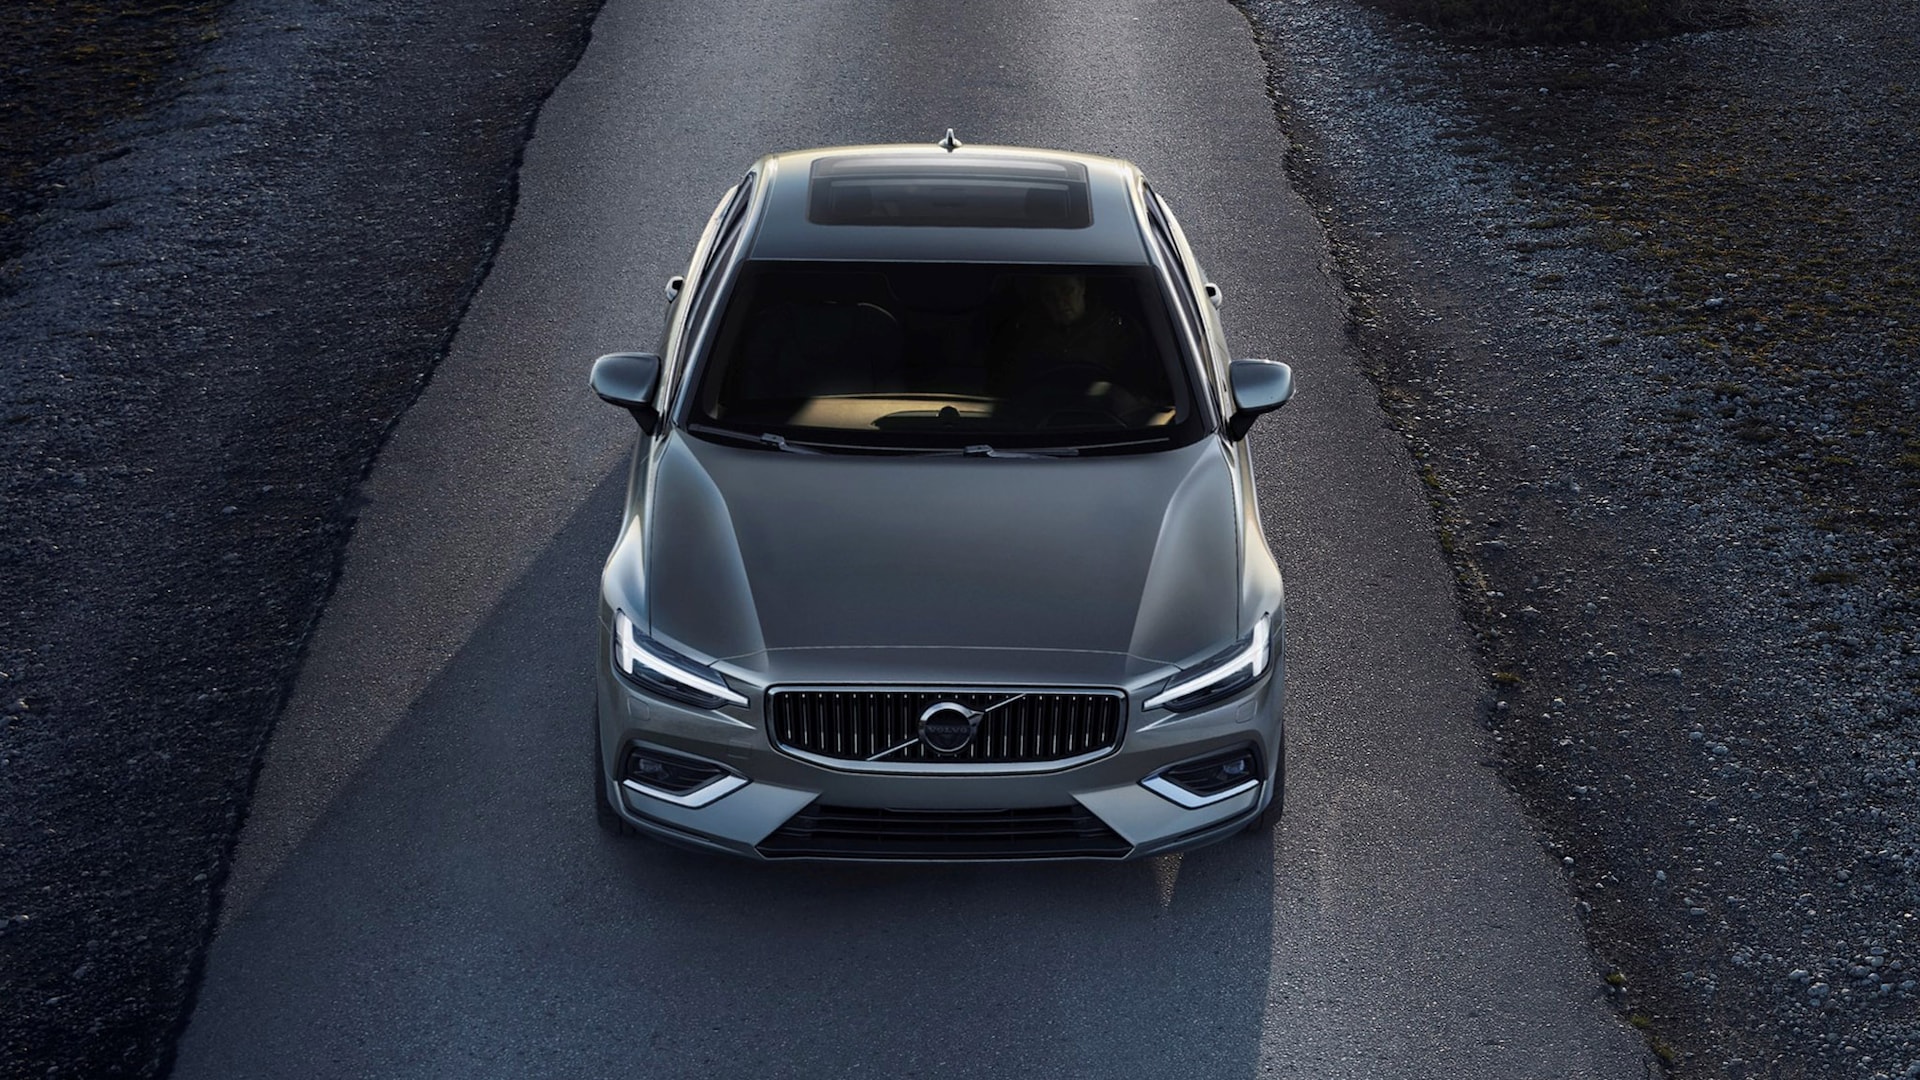 2022 Volvo S60 Prices, Reviews, and Photos - MotorTrend